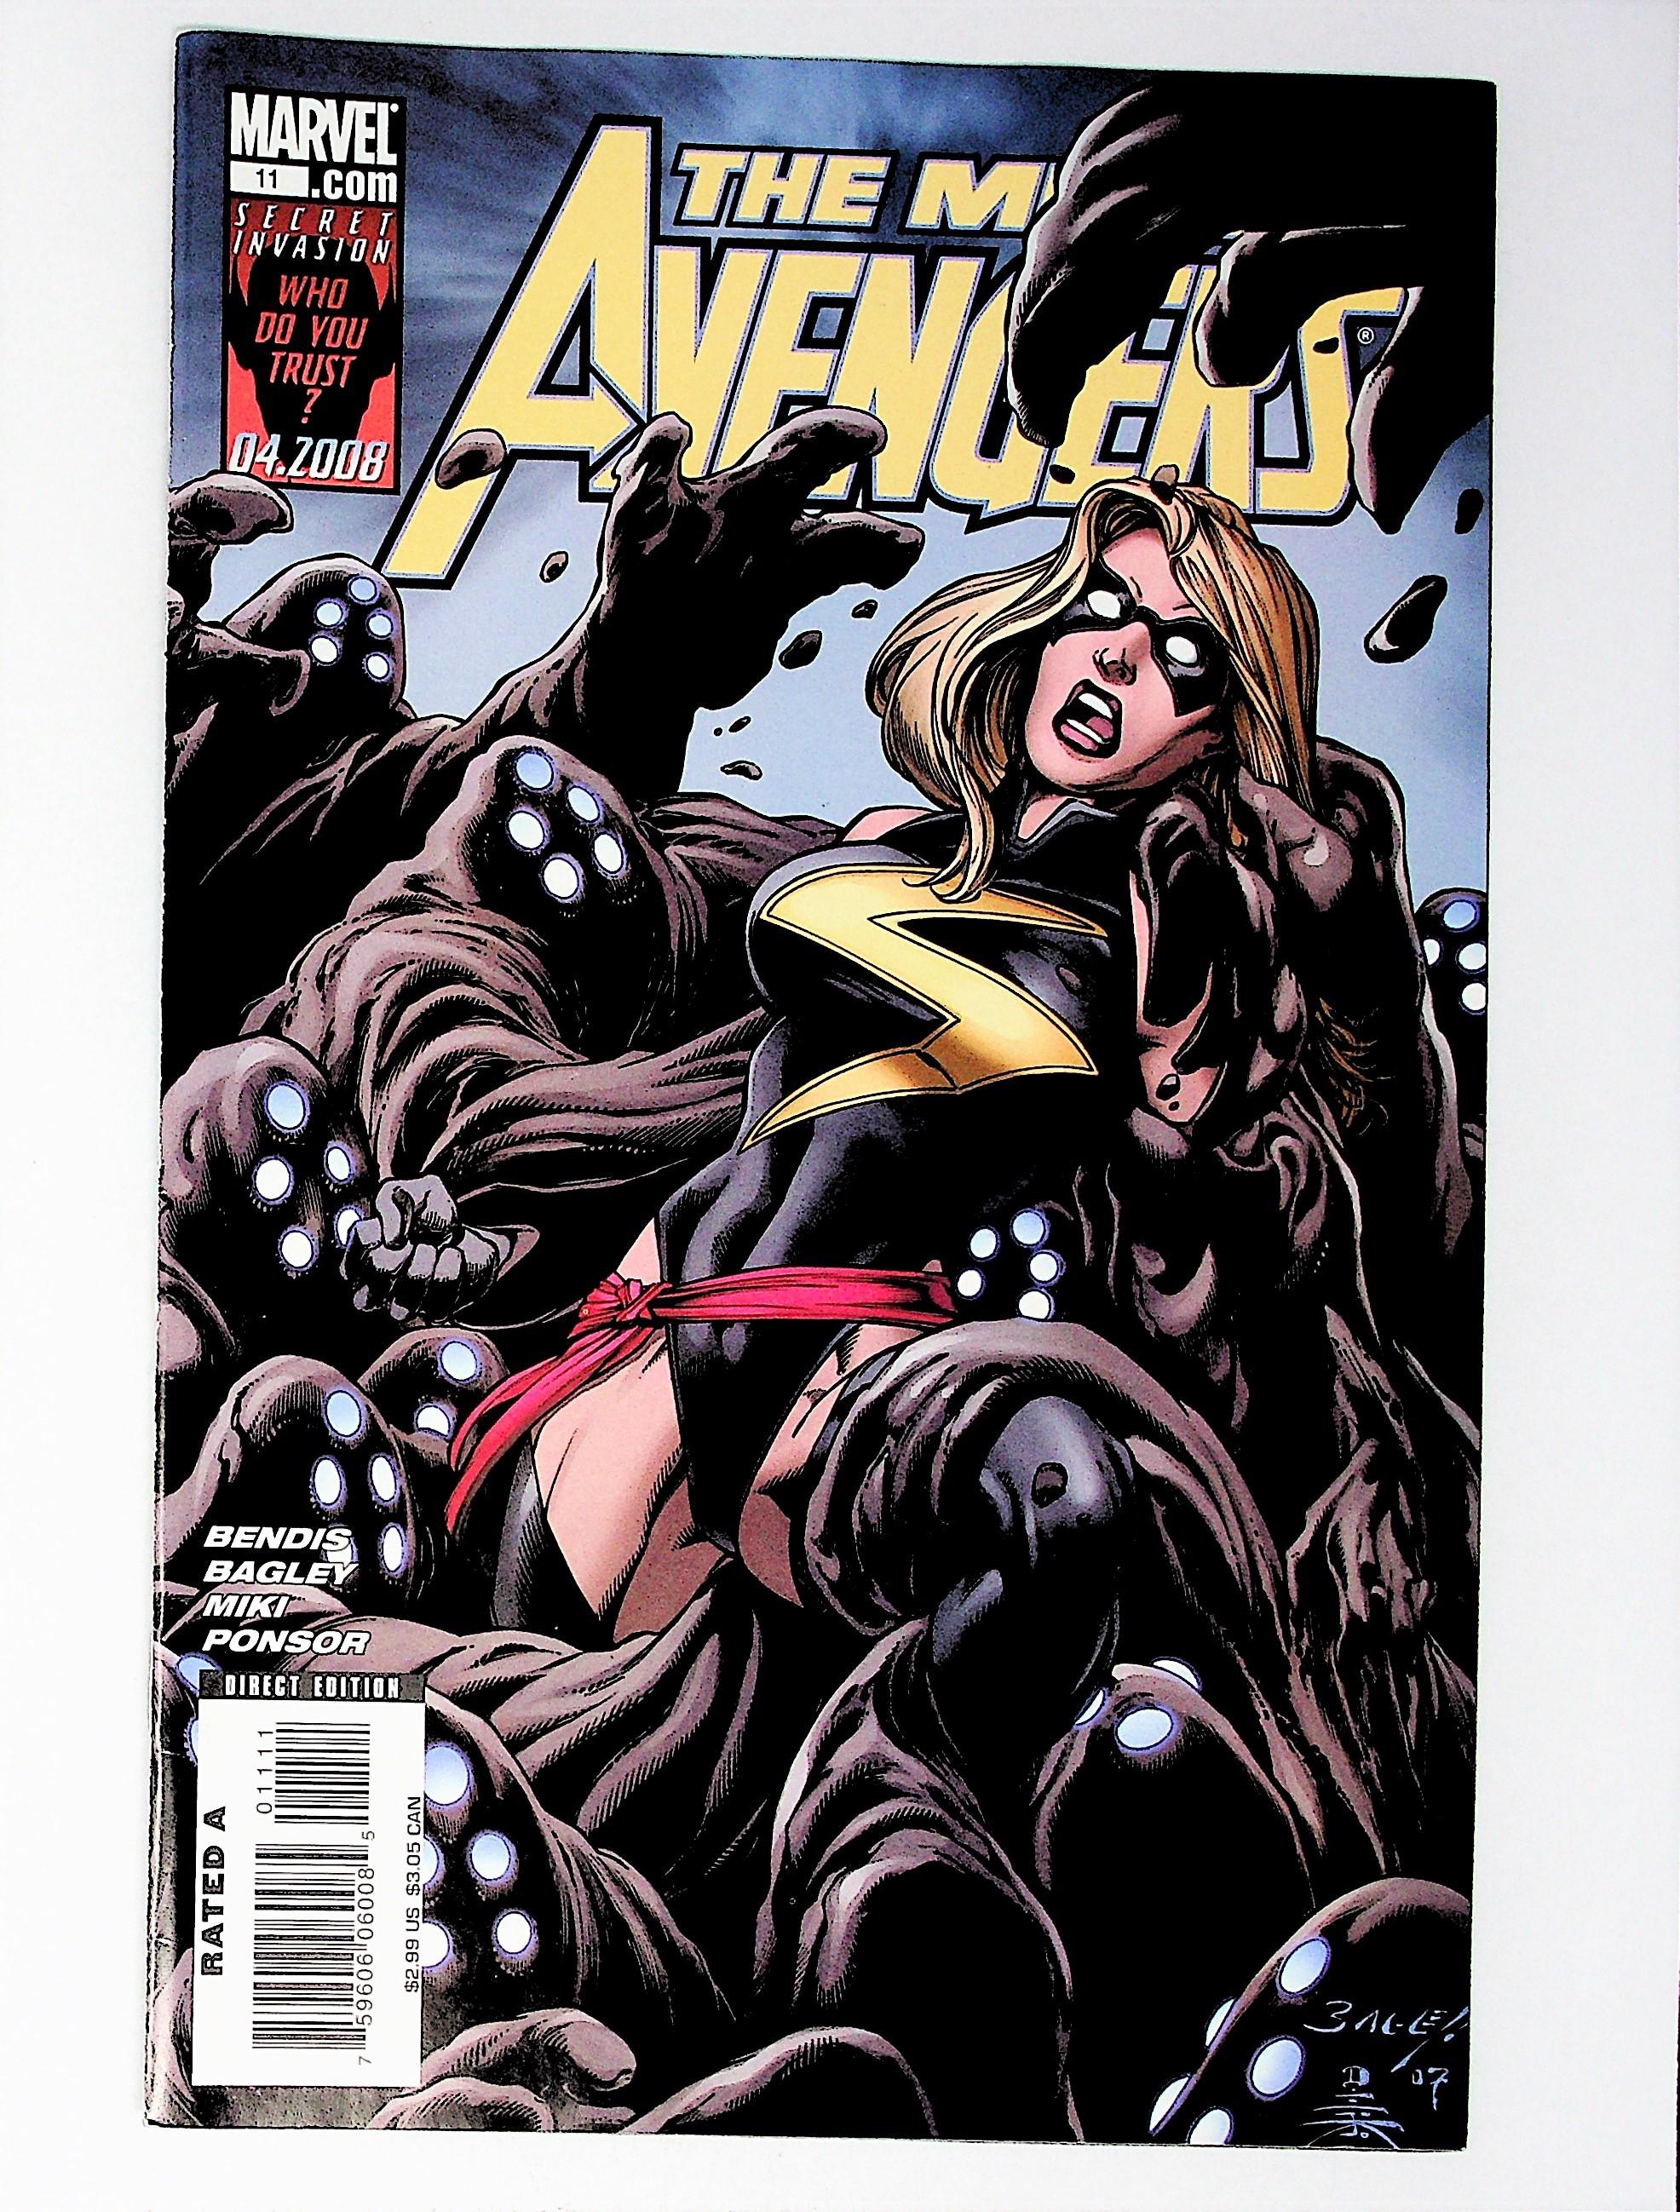 Mighty Avengers, Vol. 1 # 11